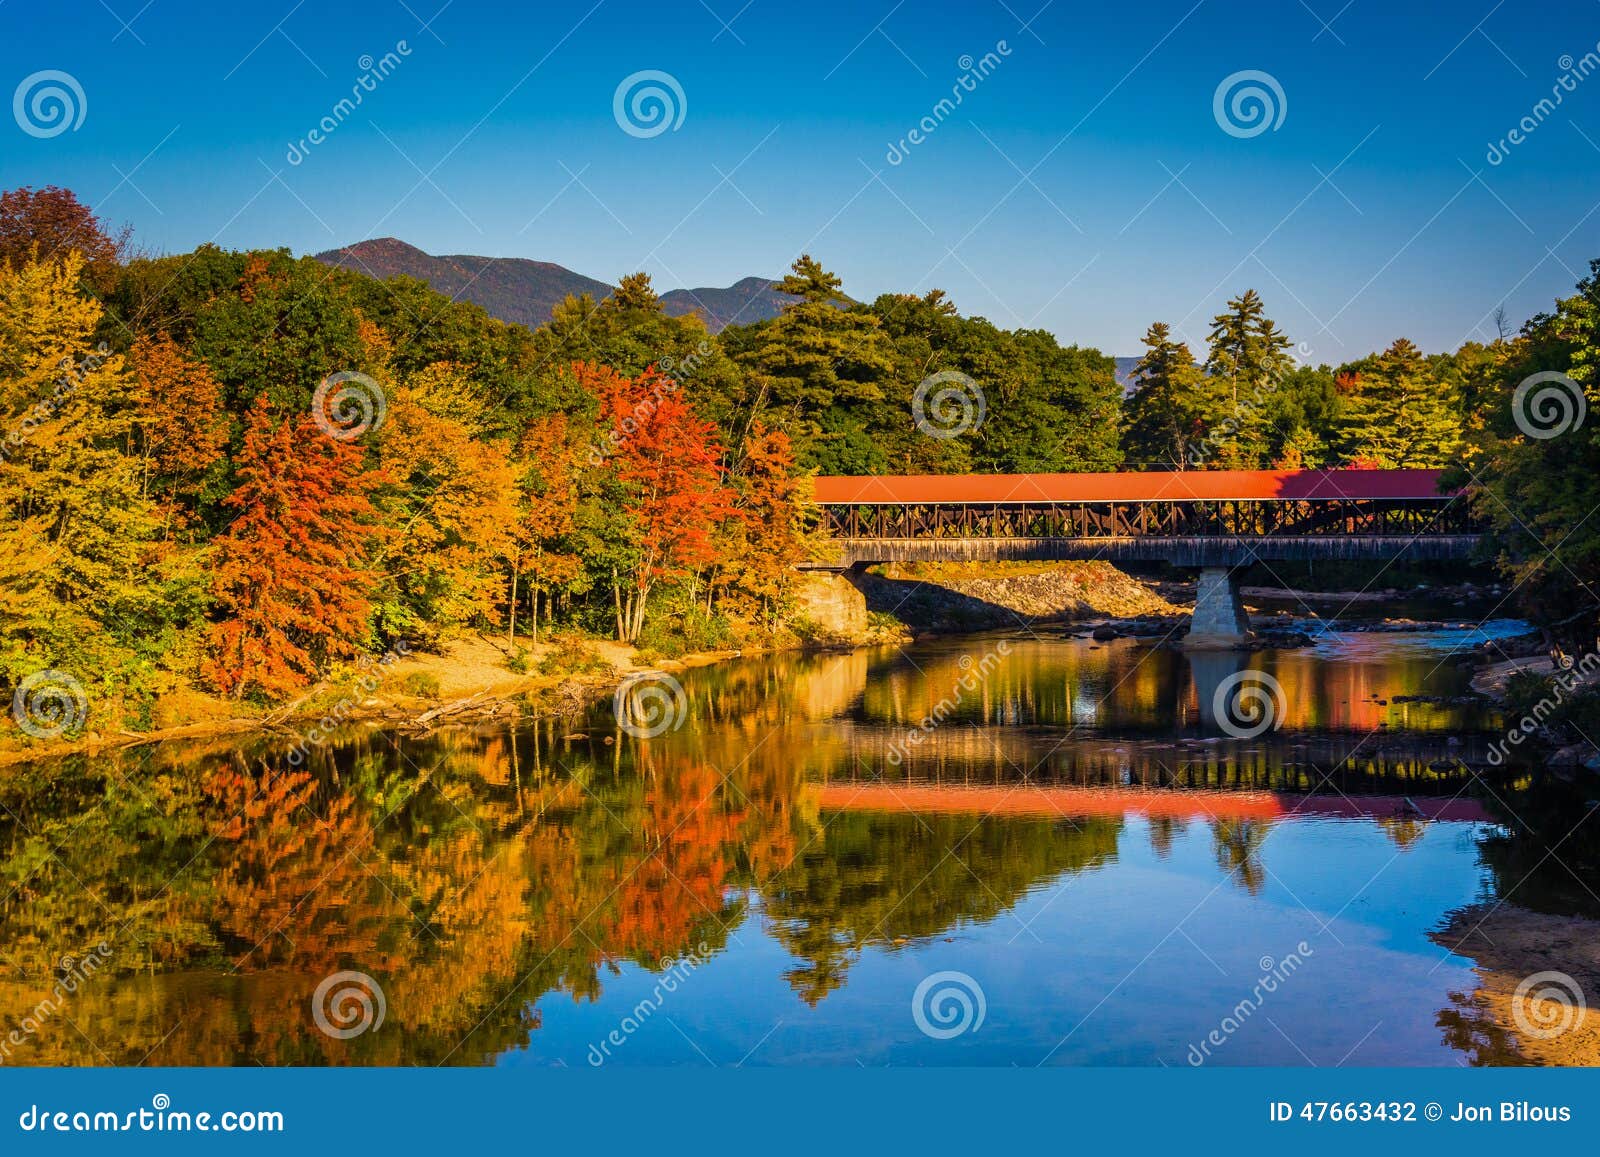 the saco river covered bridge in conway, new hampshire.